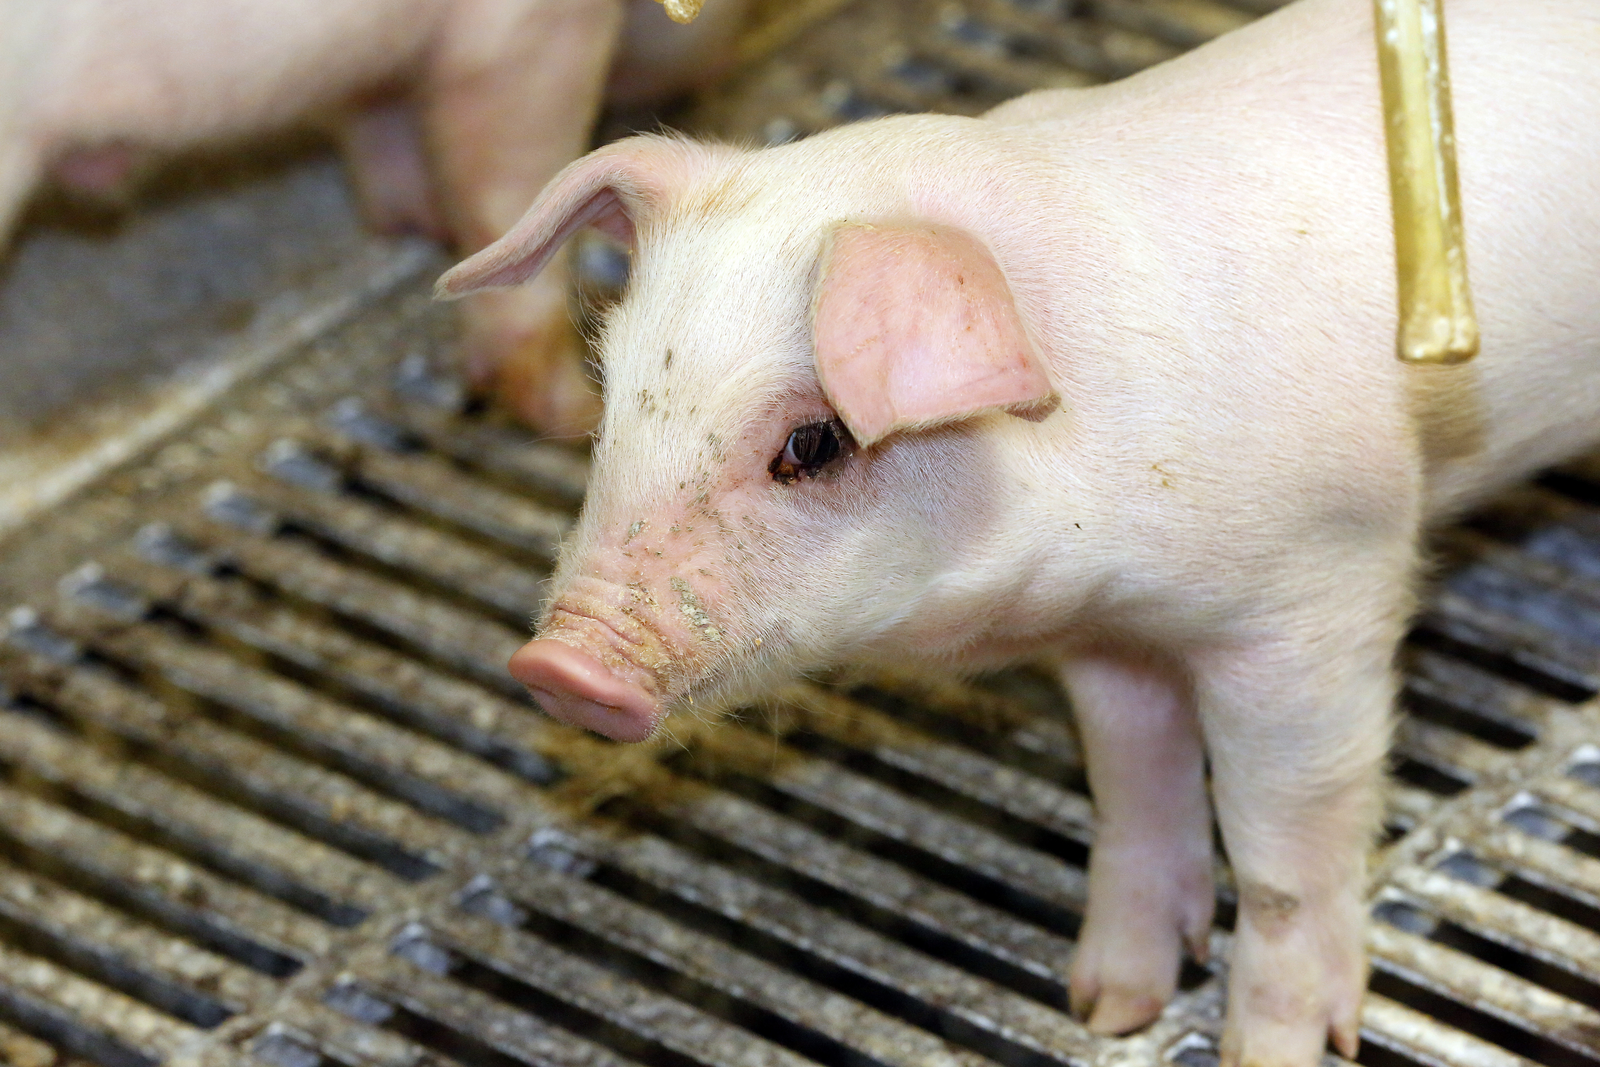 Feed intake has no effect on S. suis infected piglets